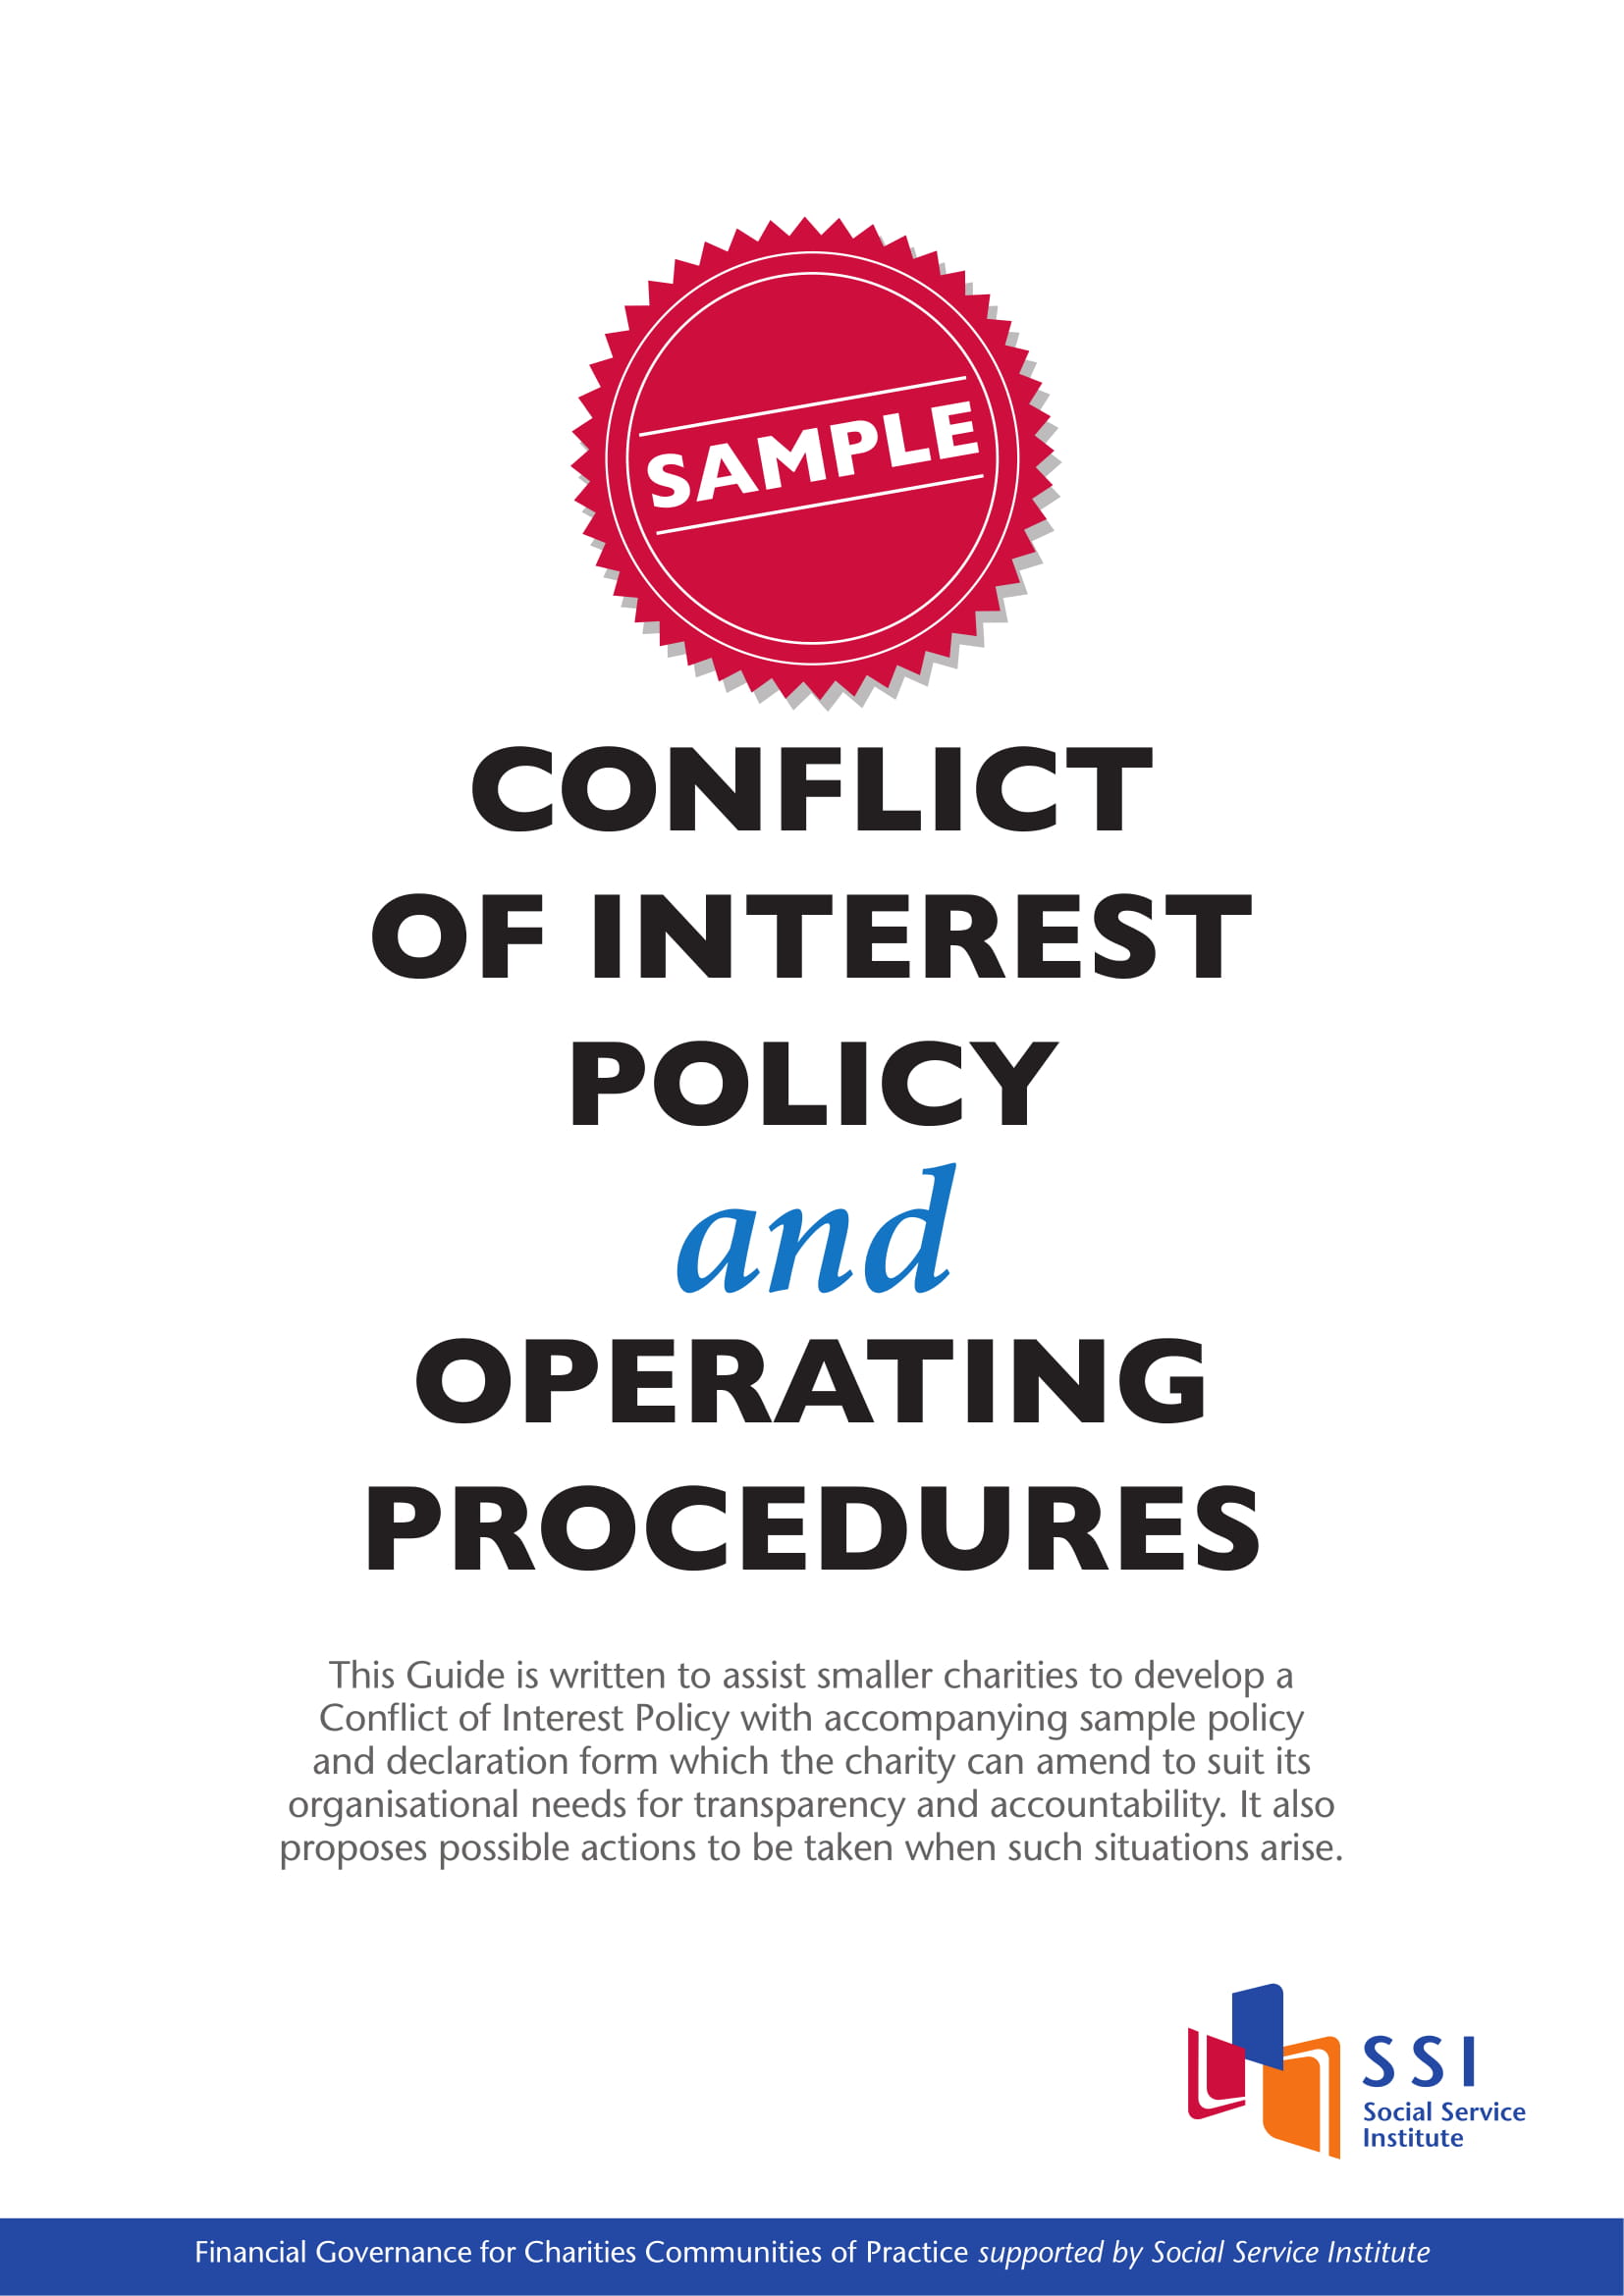 15+ Conflict of Interest Policy Examples - PDF | Examples